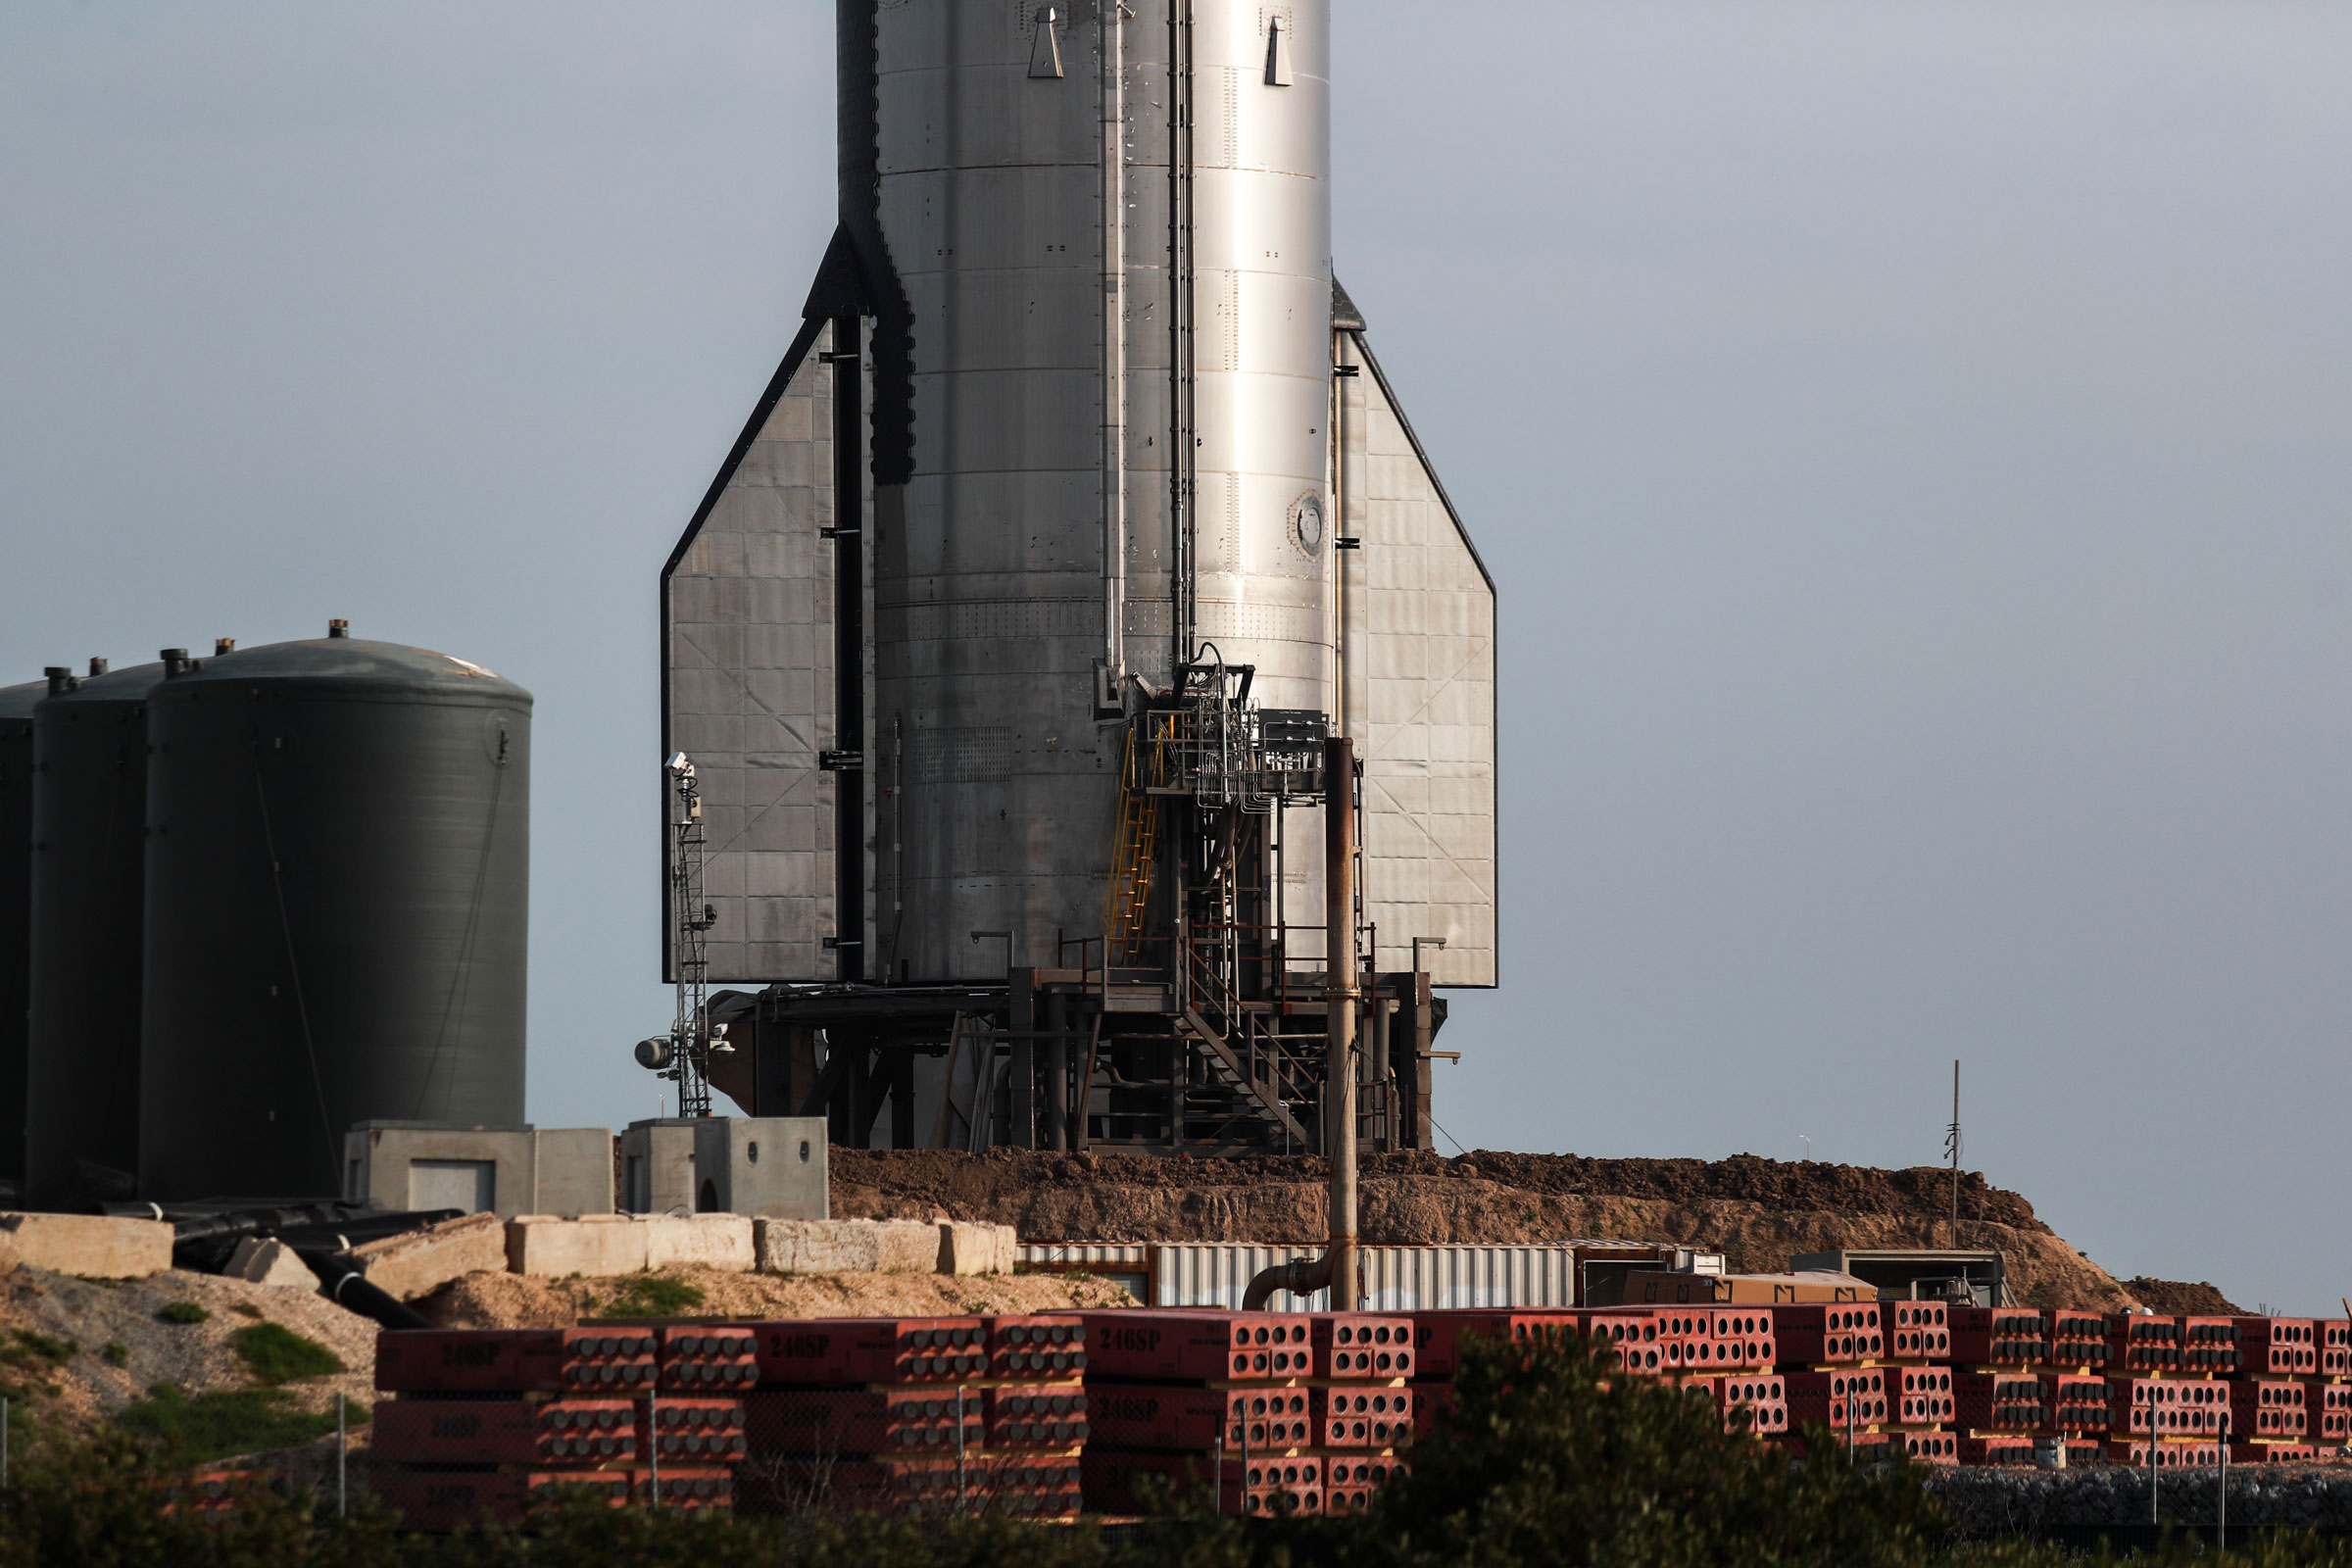 Starship 25 stands on a suborbital pad at SpaceX's south Texas facility near Brownsville, Texas